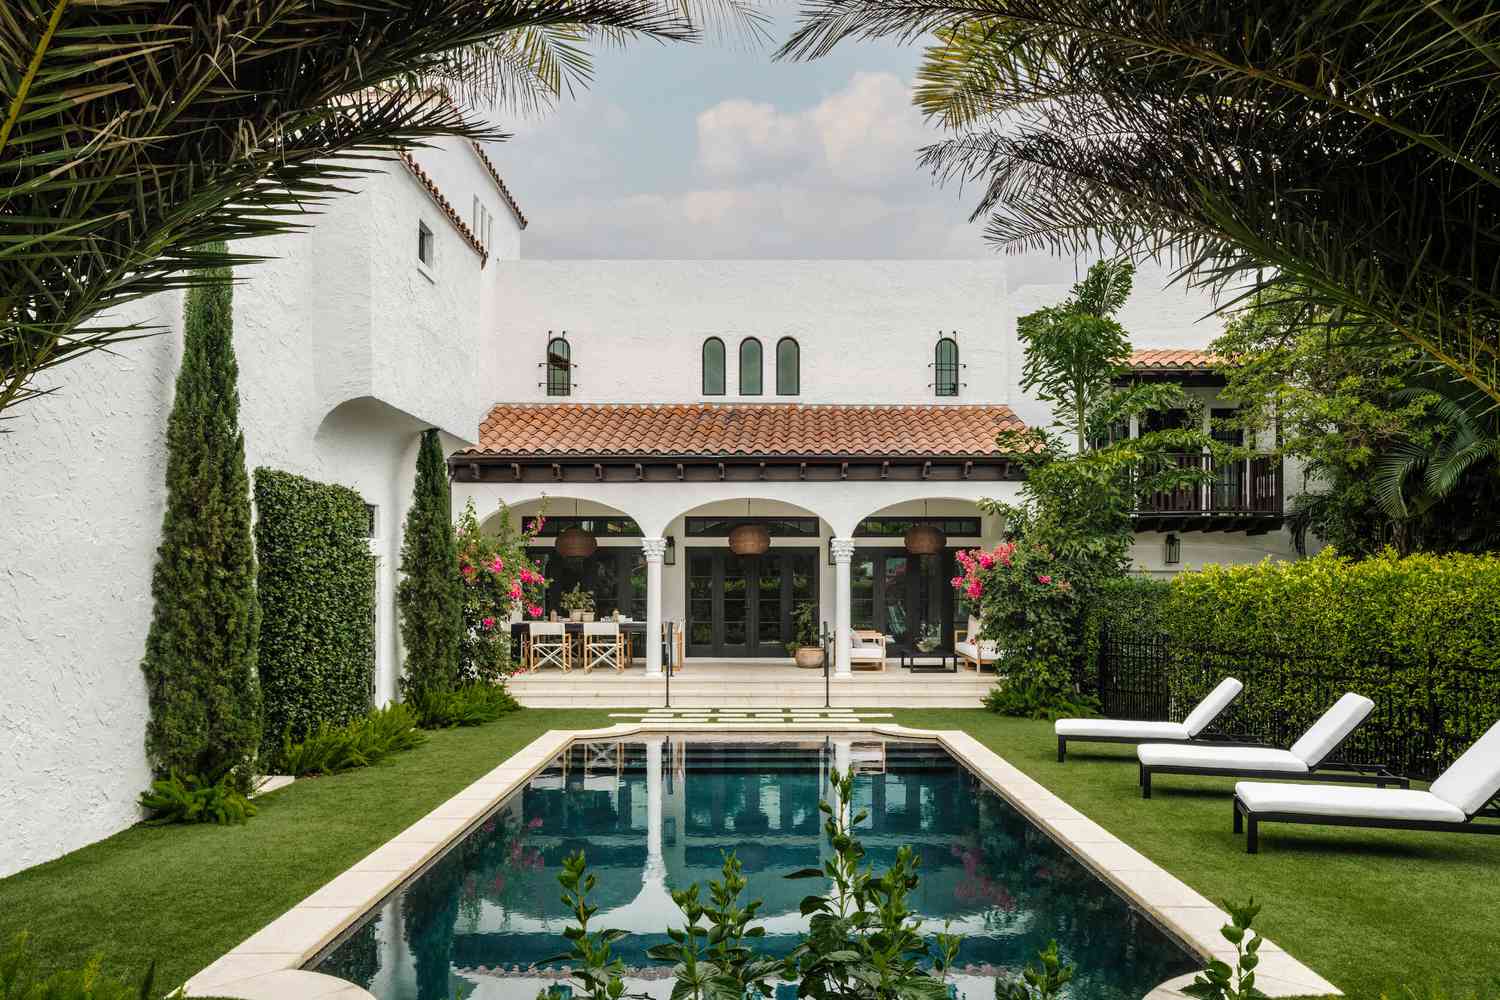 Backyard with pool and white house exterior with black trim and arched details